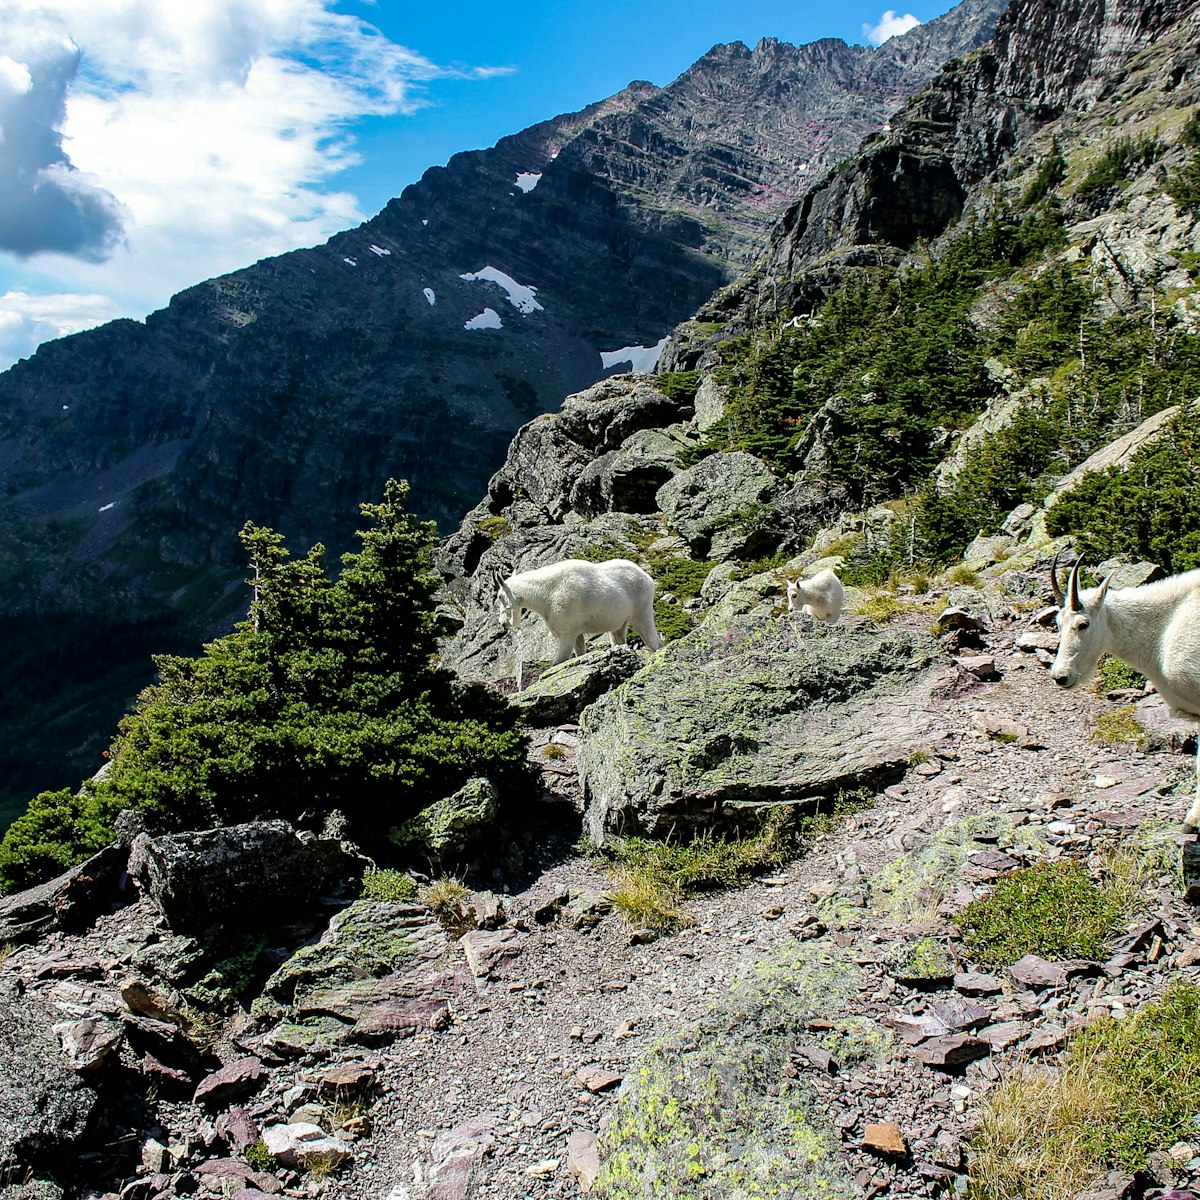 A family of goats near Gunsight Pass in Glacier National Park